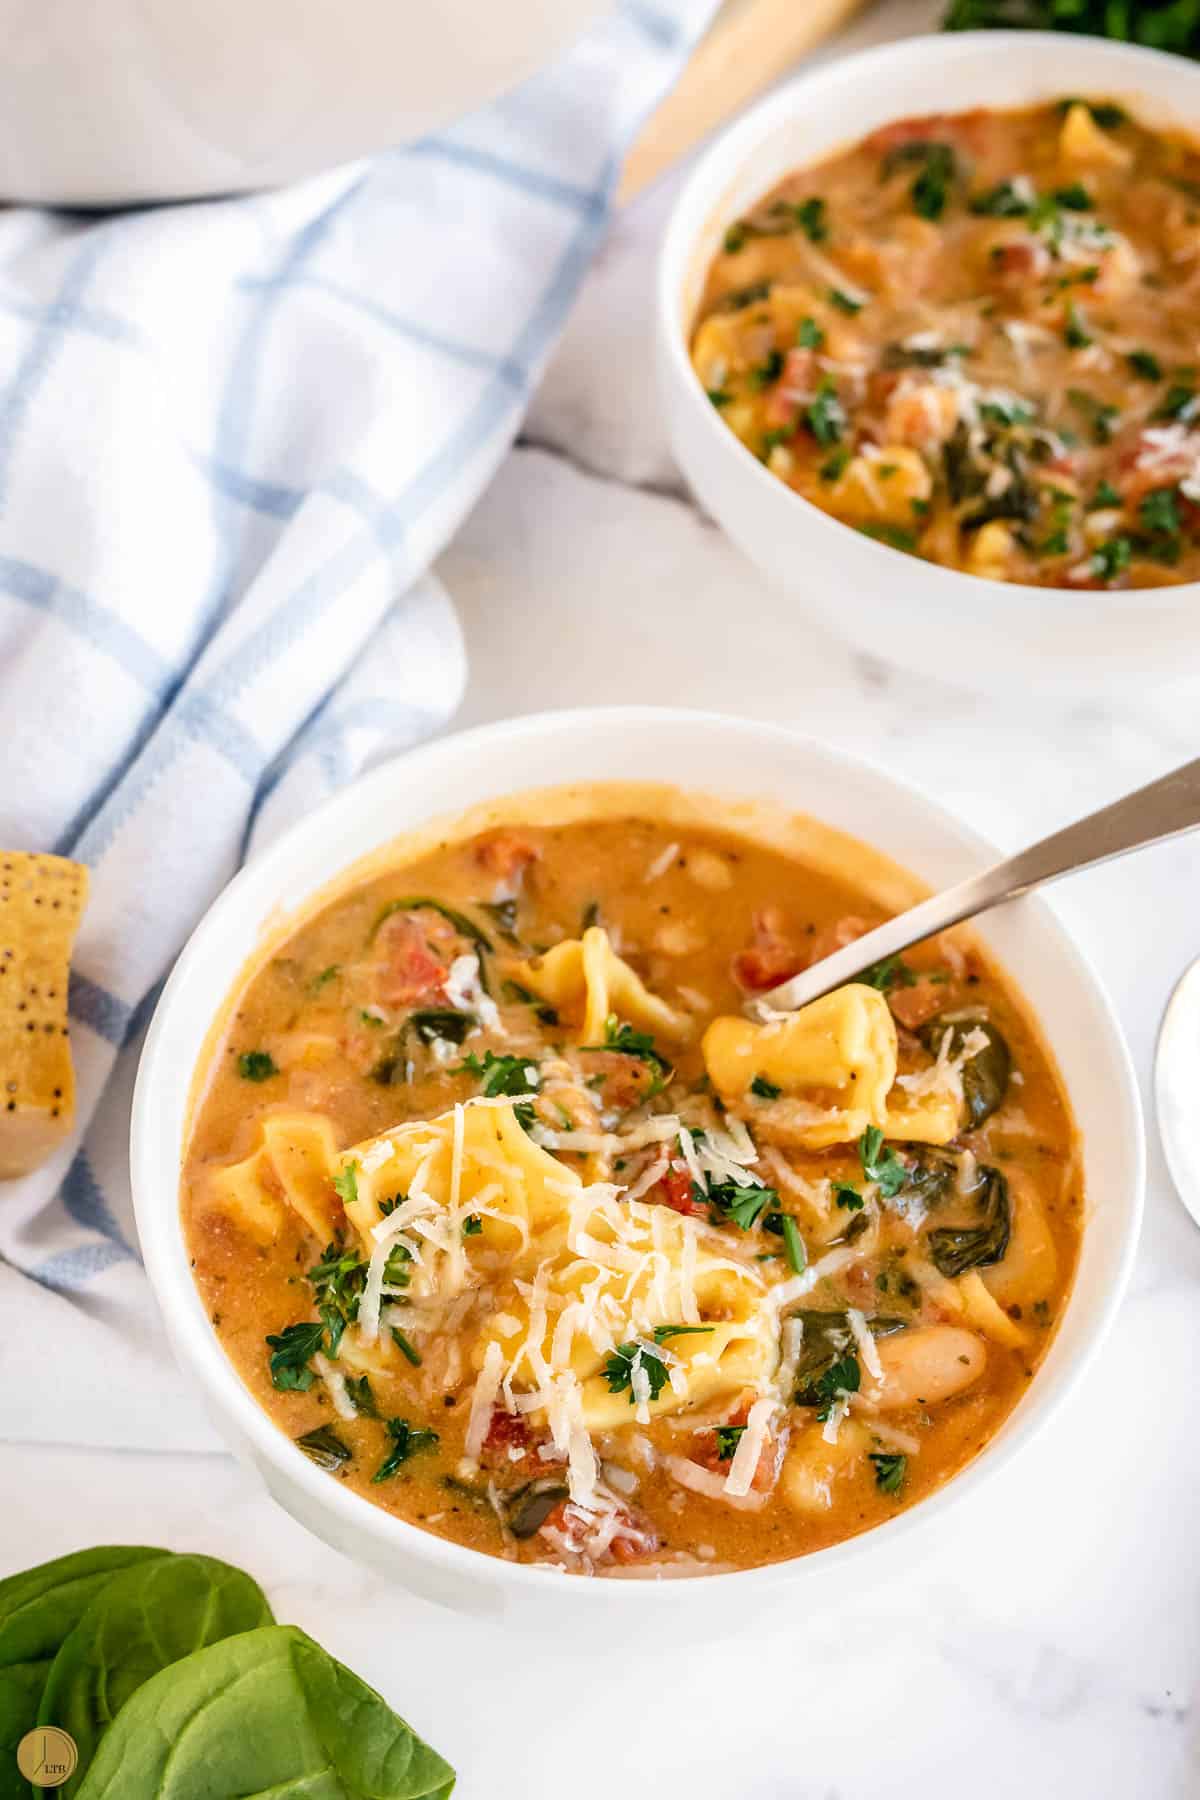 soup is one of those easy recipes that everyone loves!